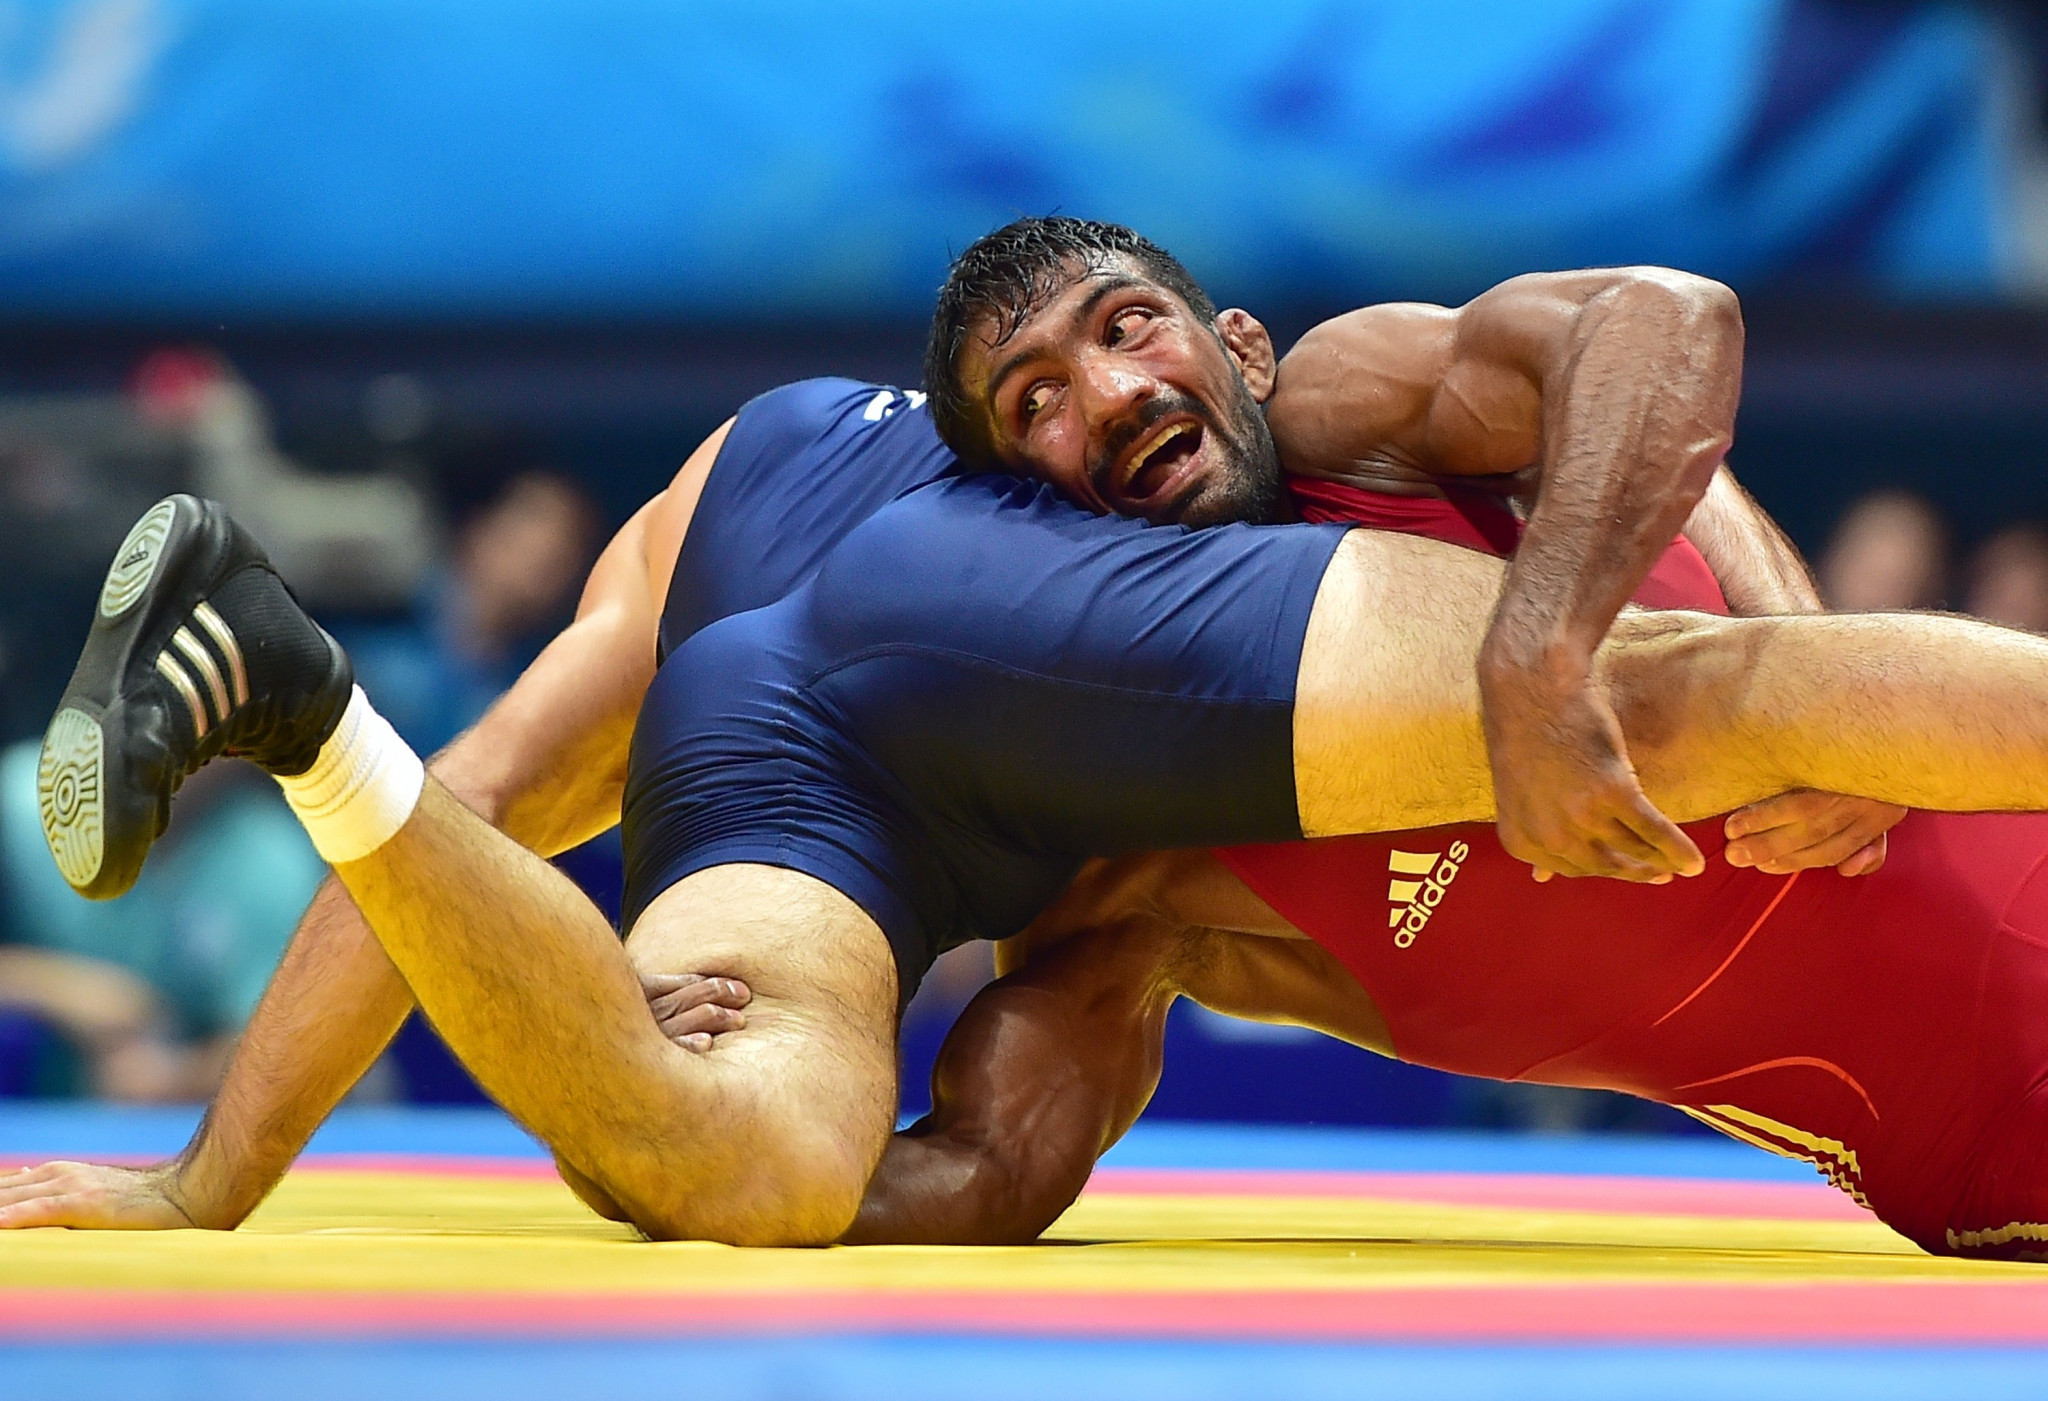 India's Yogeshwar Dutt has been preparing for his return at his academy in Bali ©Getty Images